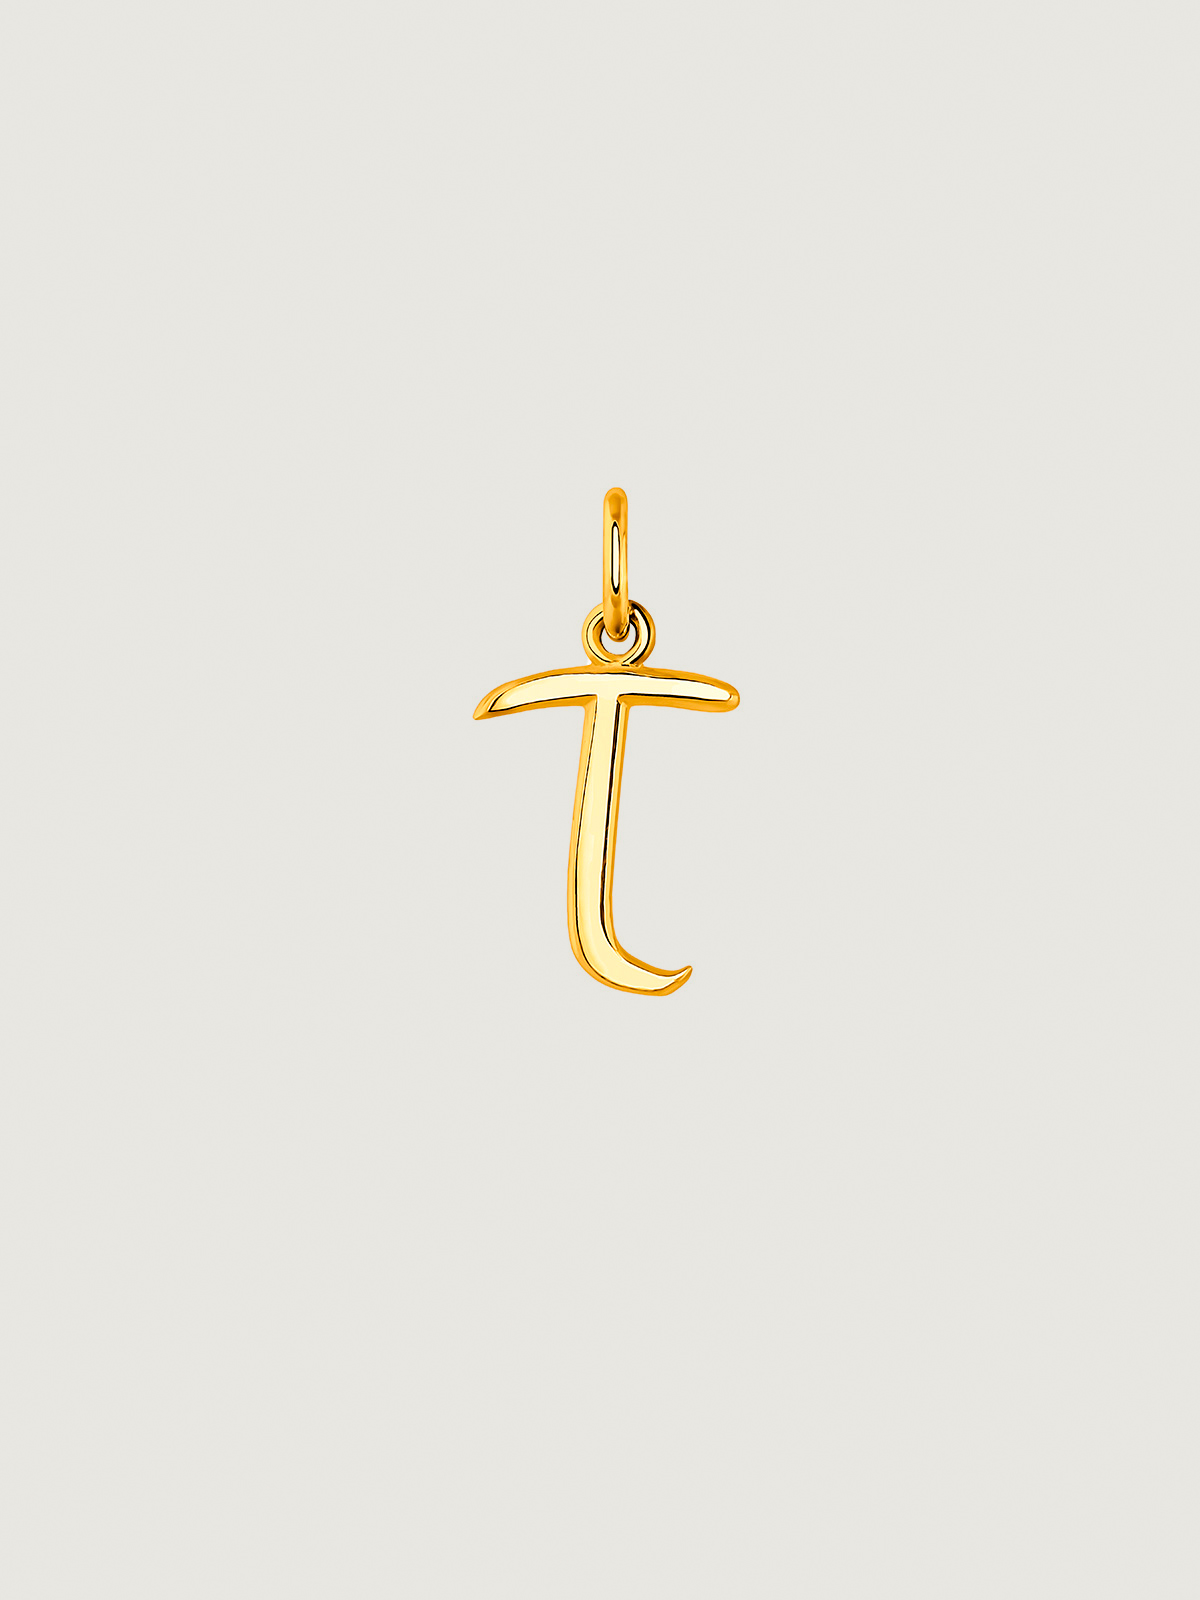 Charm made from 925 silver, gold-plated in 18K yellow gold, with initial T.